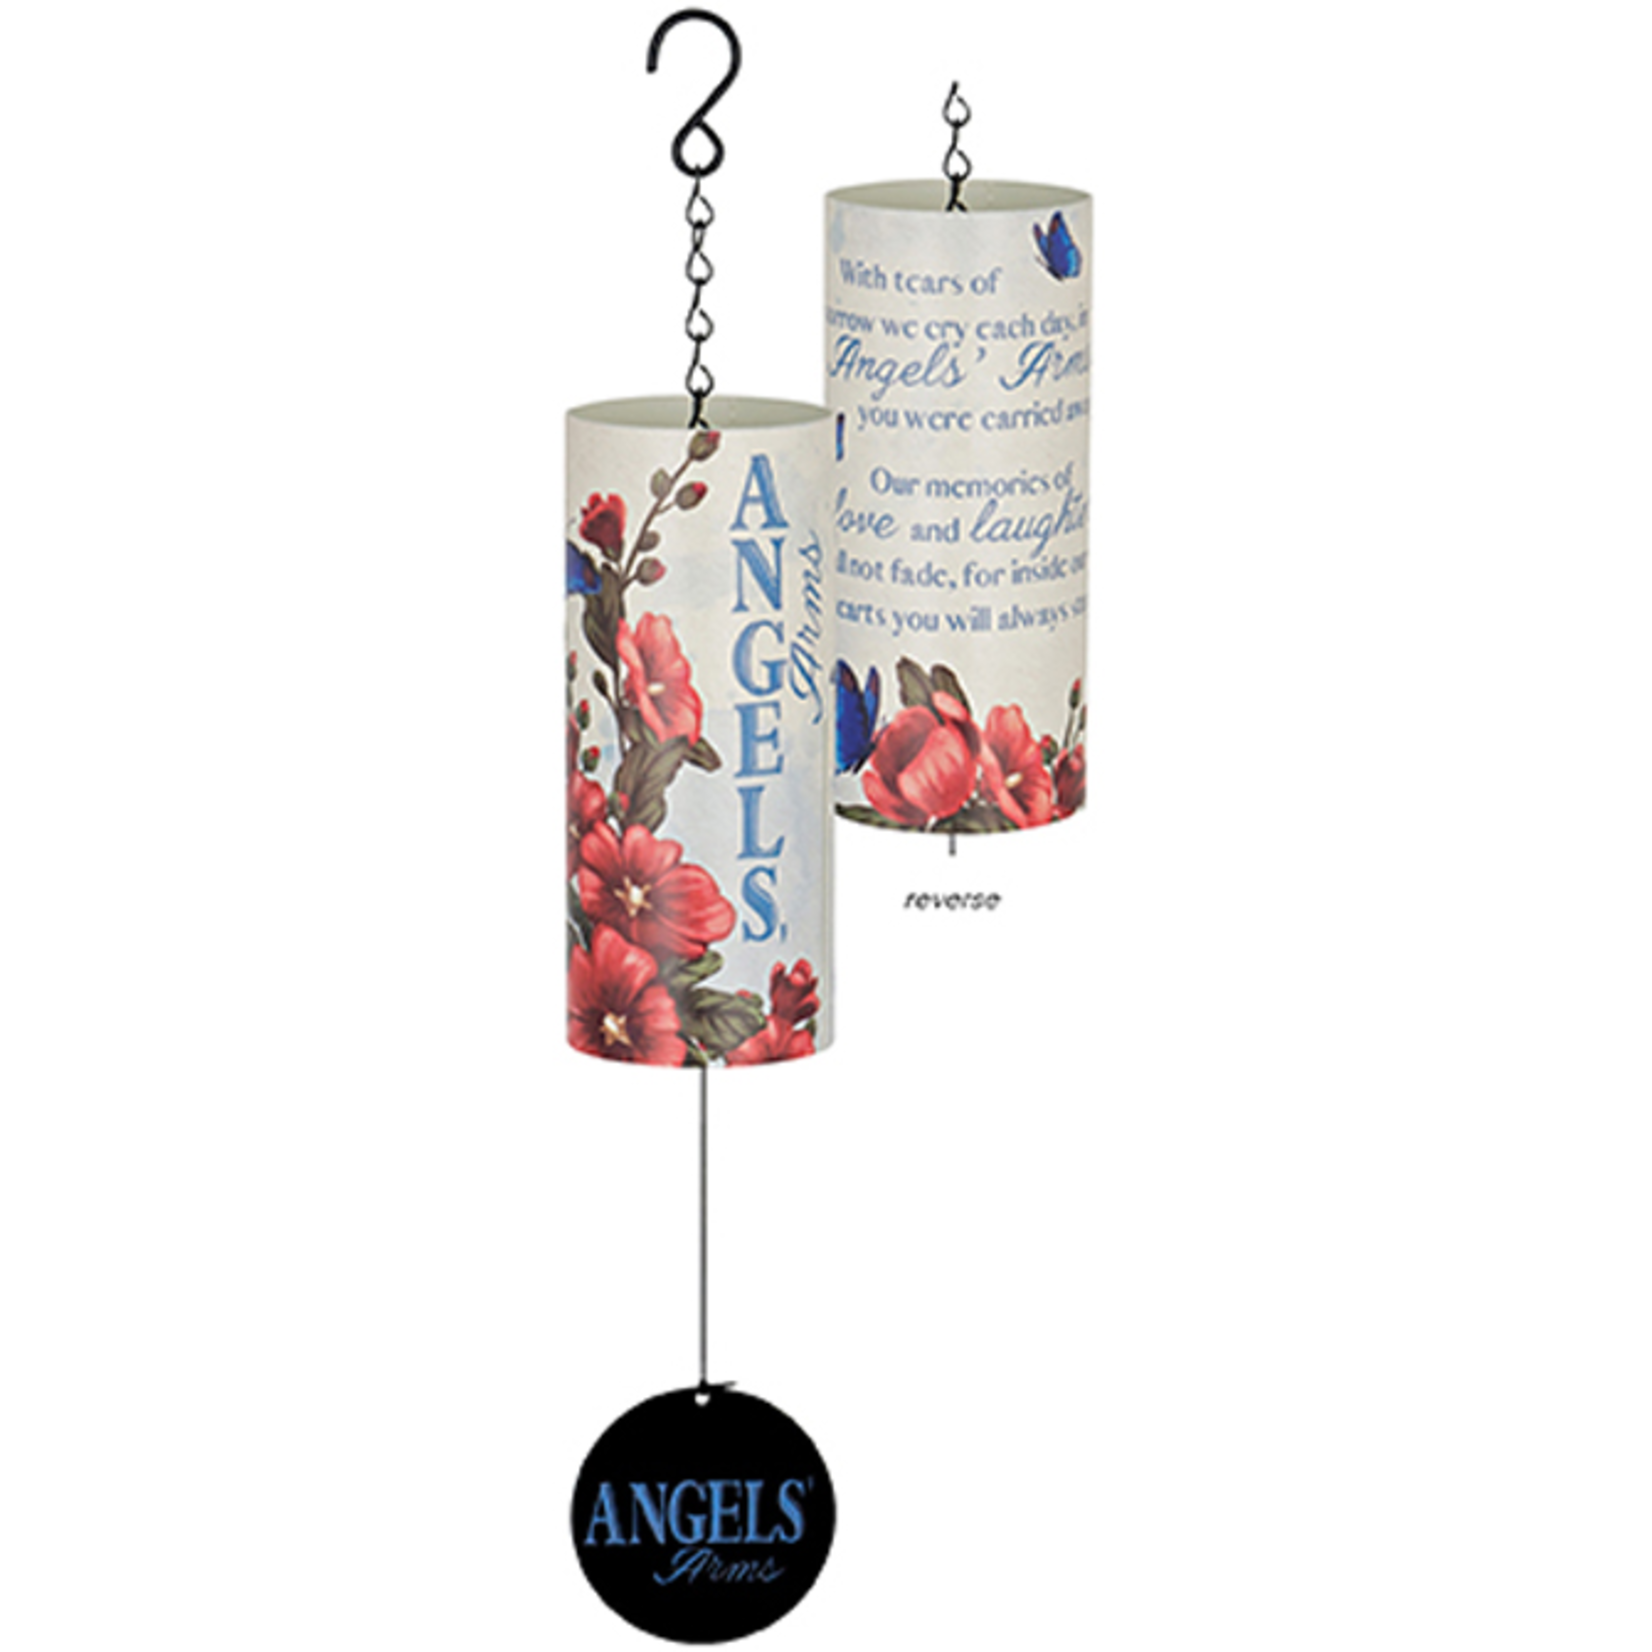 Carson Angel’s Arms Cylinder Sonnet Chime 18”